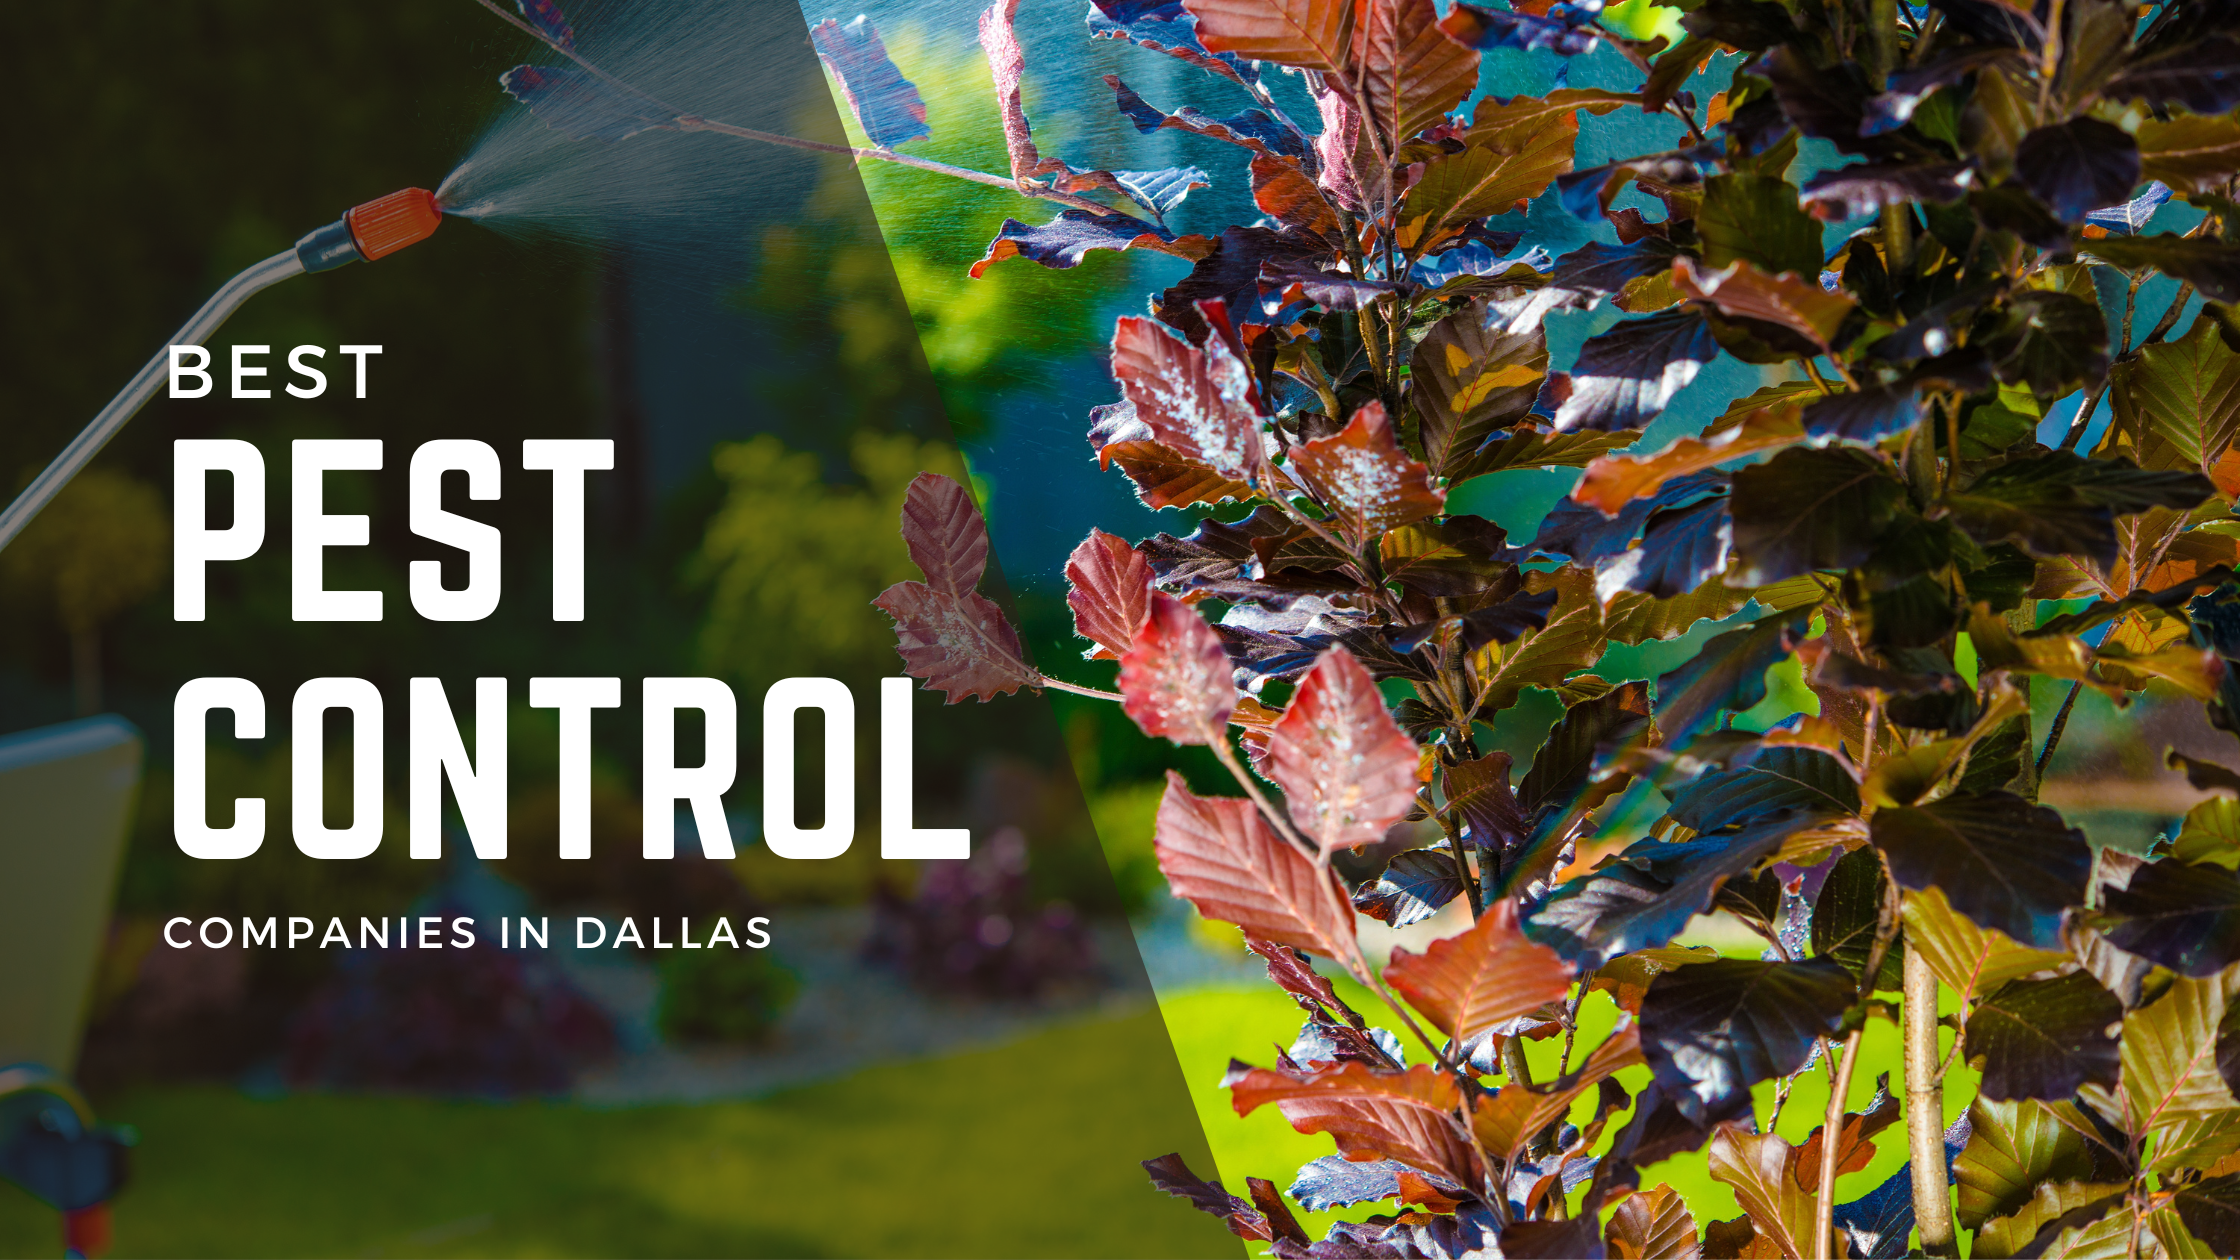 A blog banner describing the best pest-control companies in Dallas, Lake highlands, lochwood, highland meadows, and other neighborhoods in Dallas